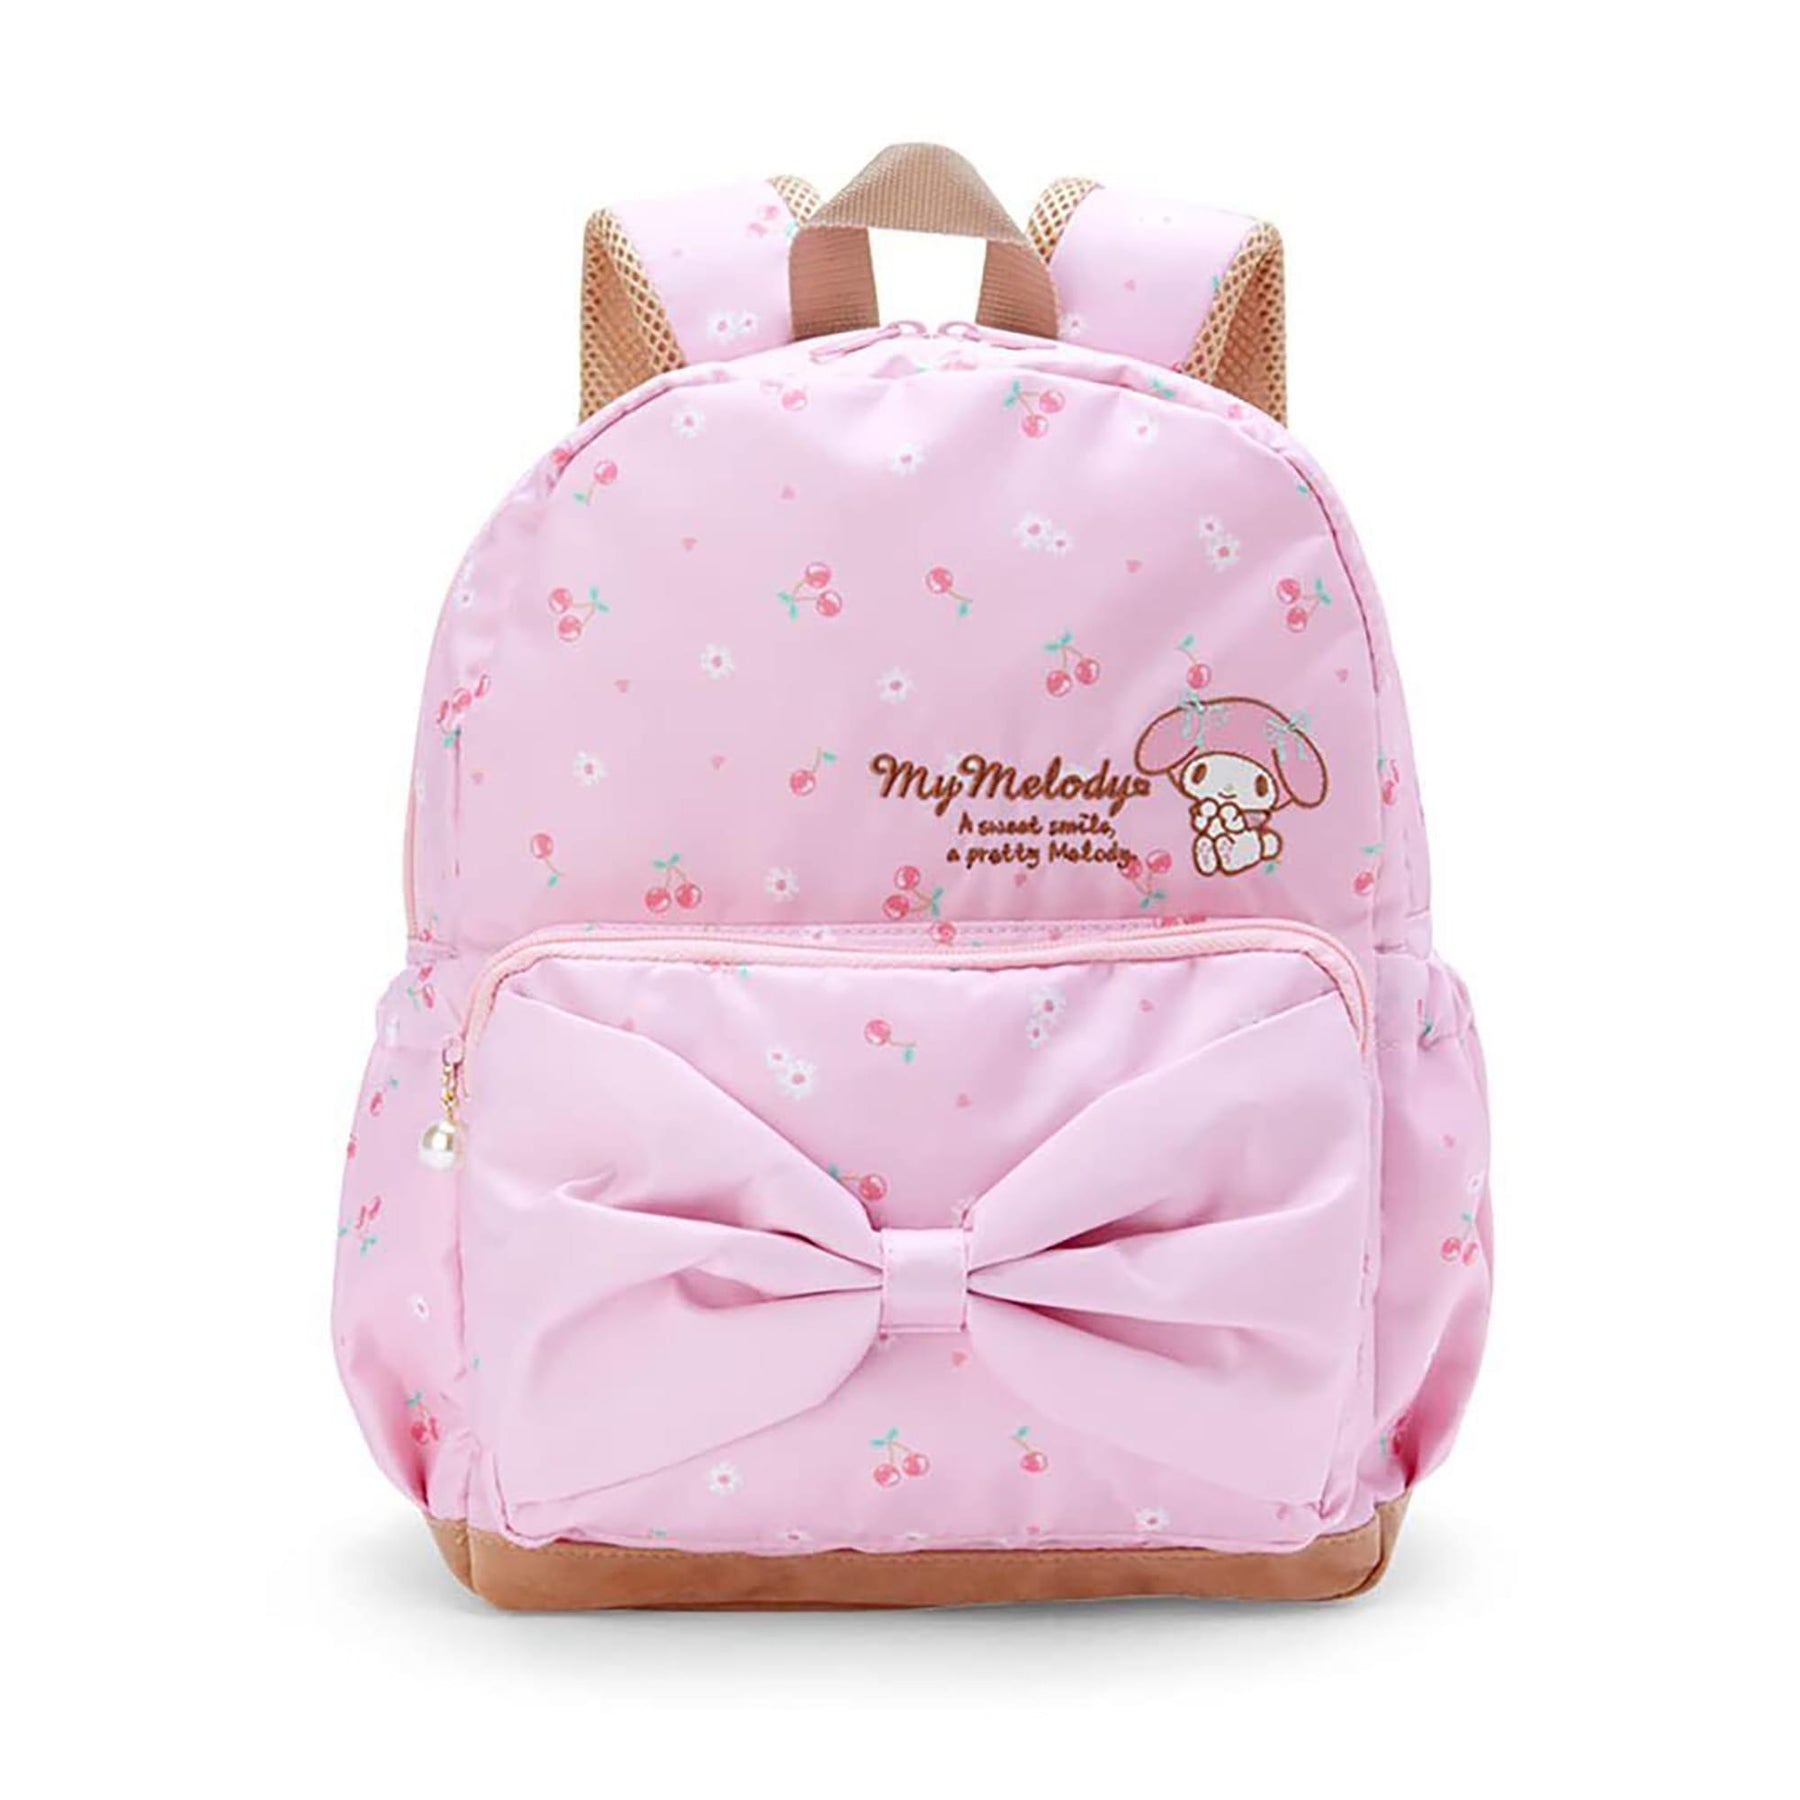 Sanrio My Melody 12.5 Inch Kids Backpack